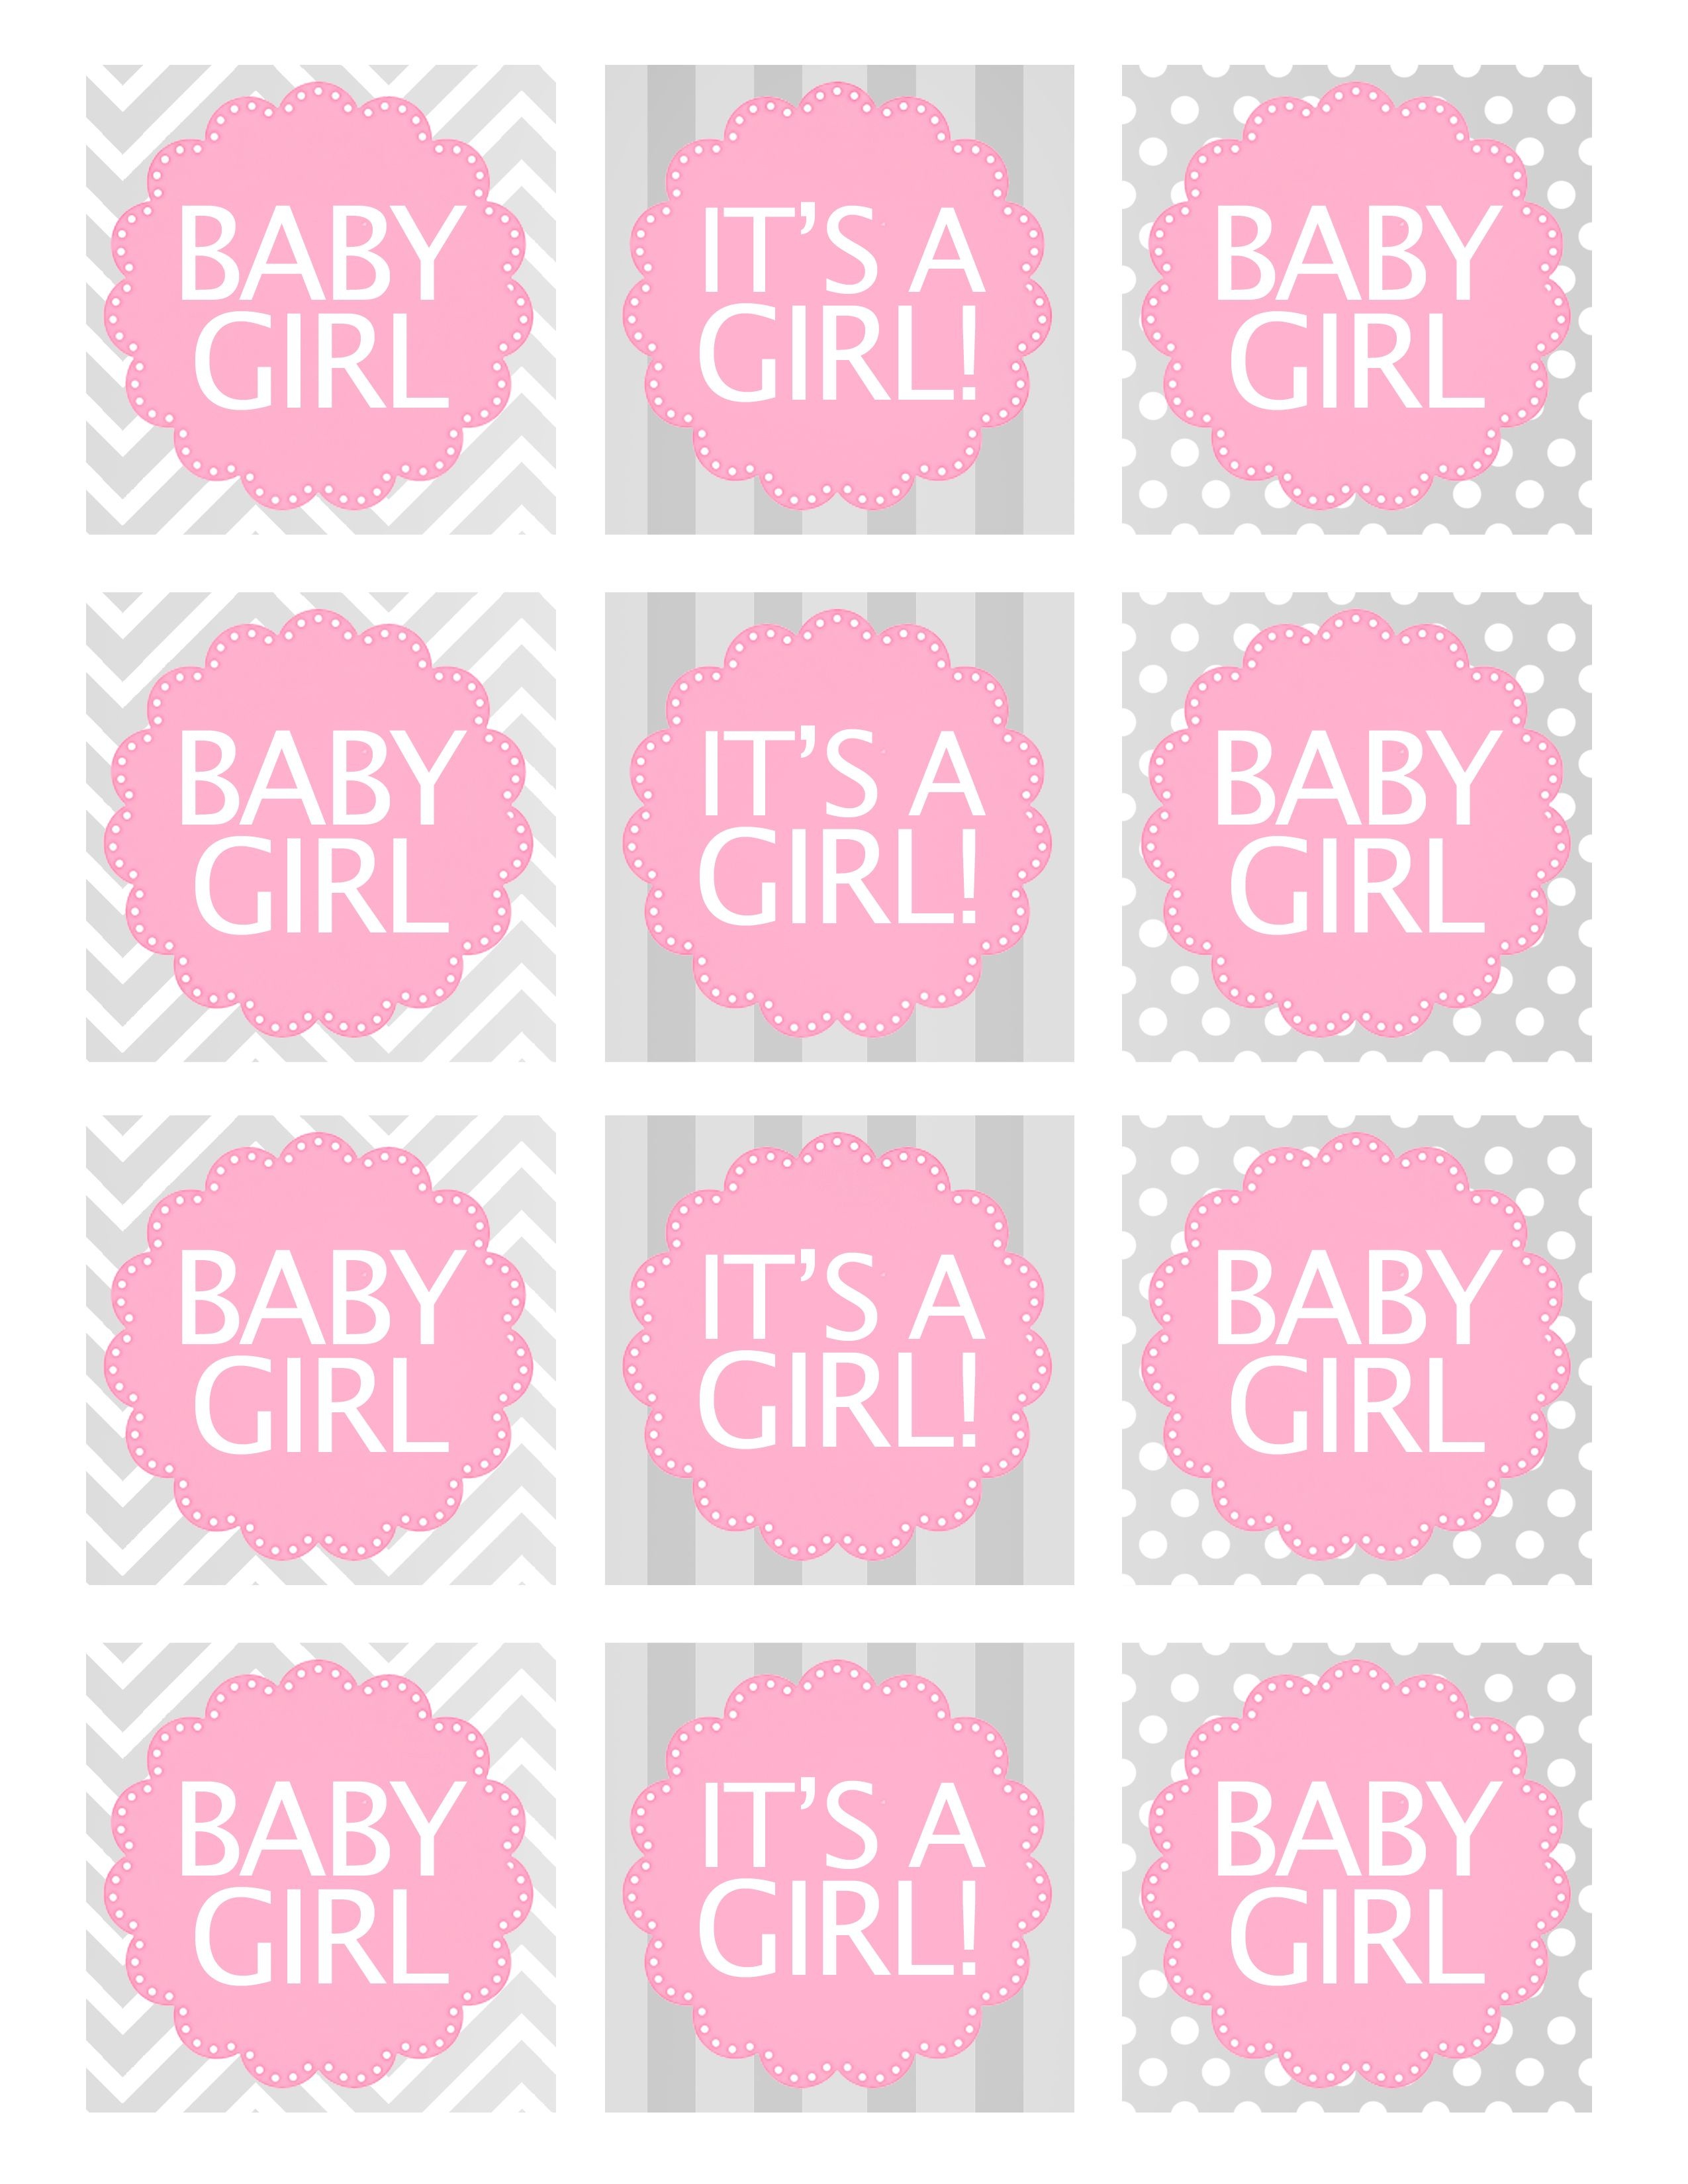 Baby Girl Shower Free Printables | Baby Shower Ideas | Baby Shower - Free Printable Baby Shower Favor Tags